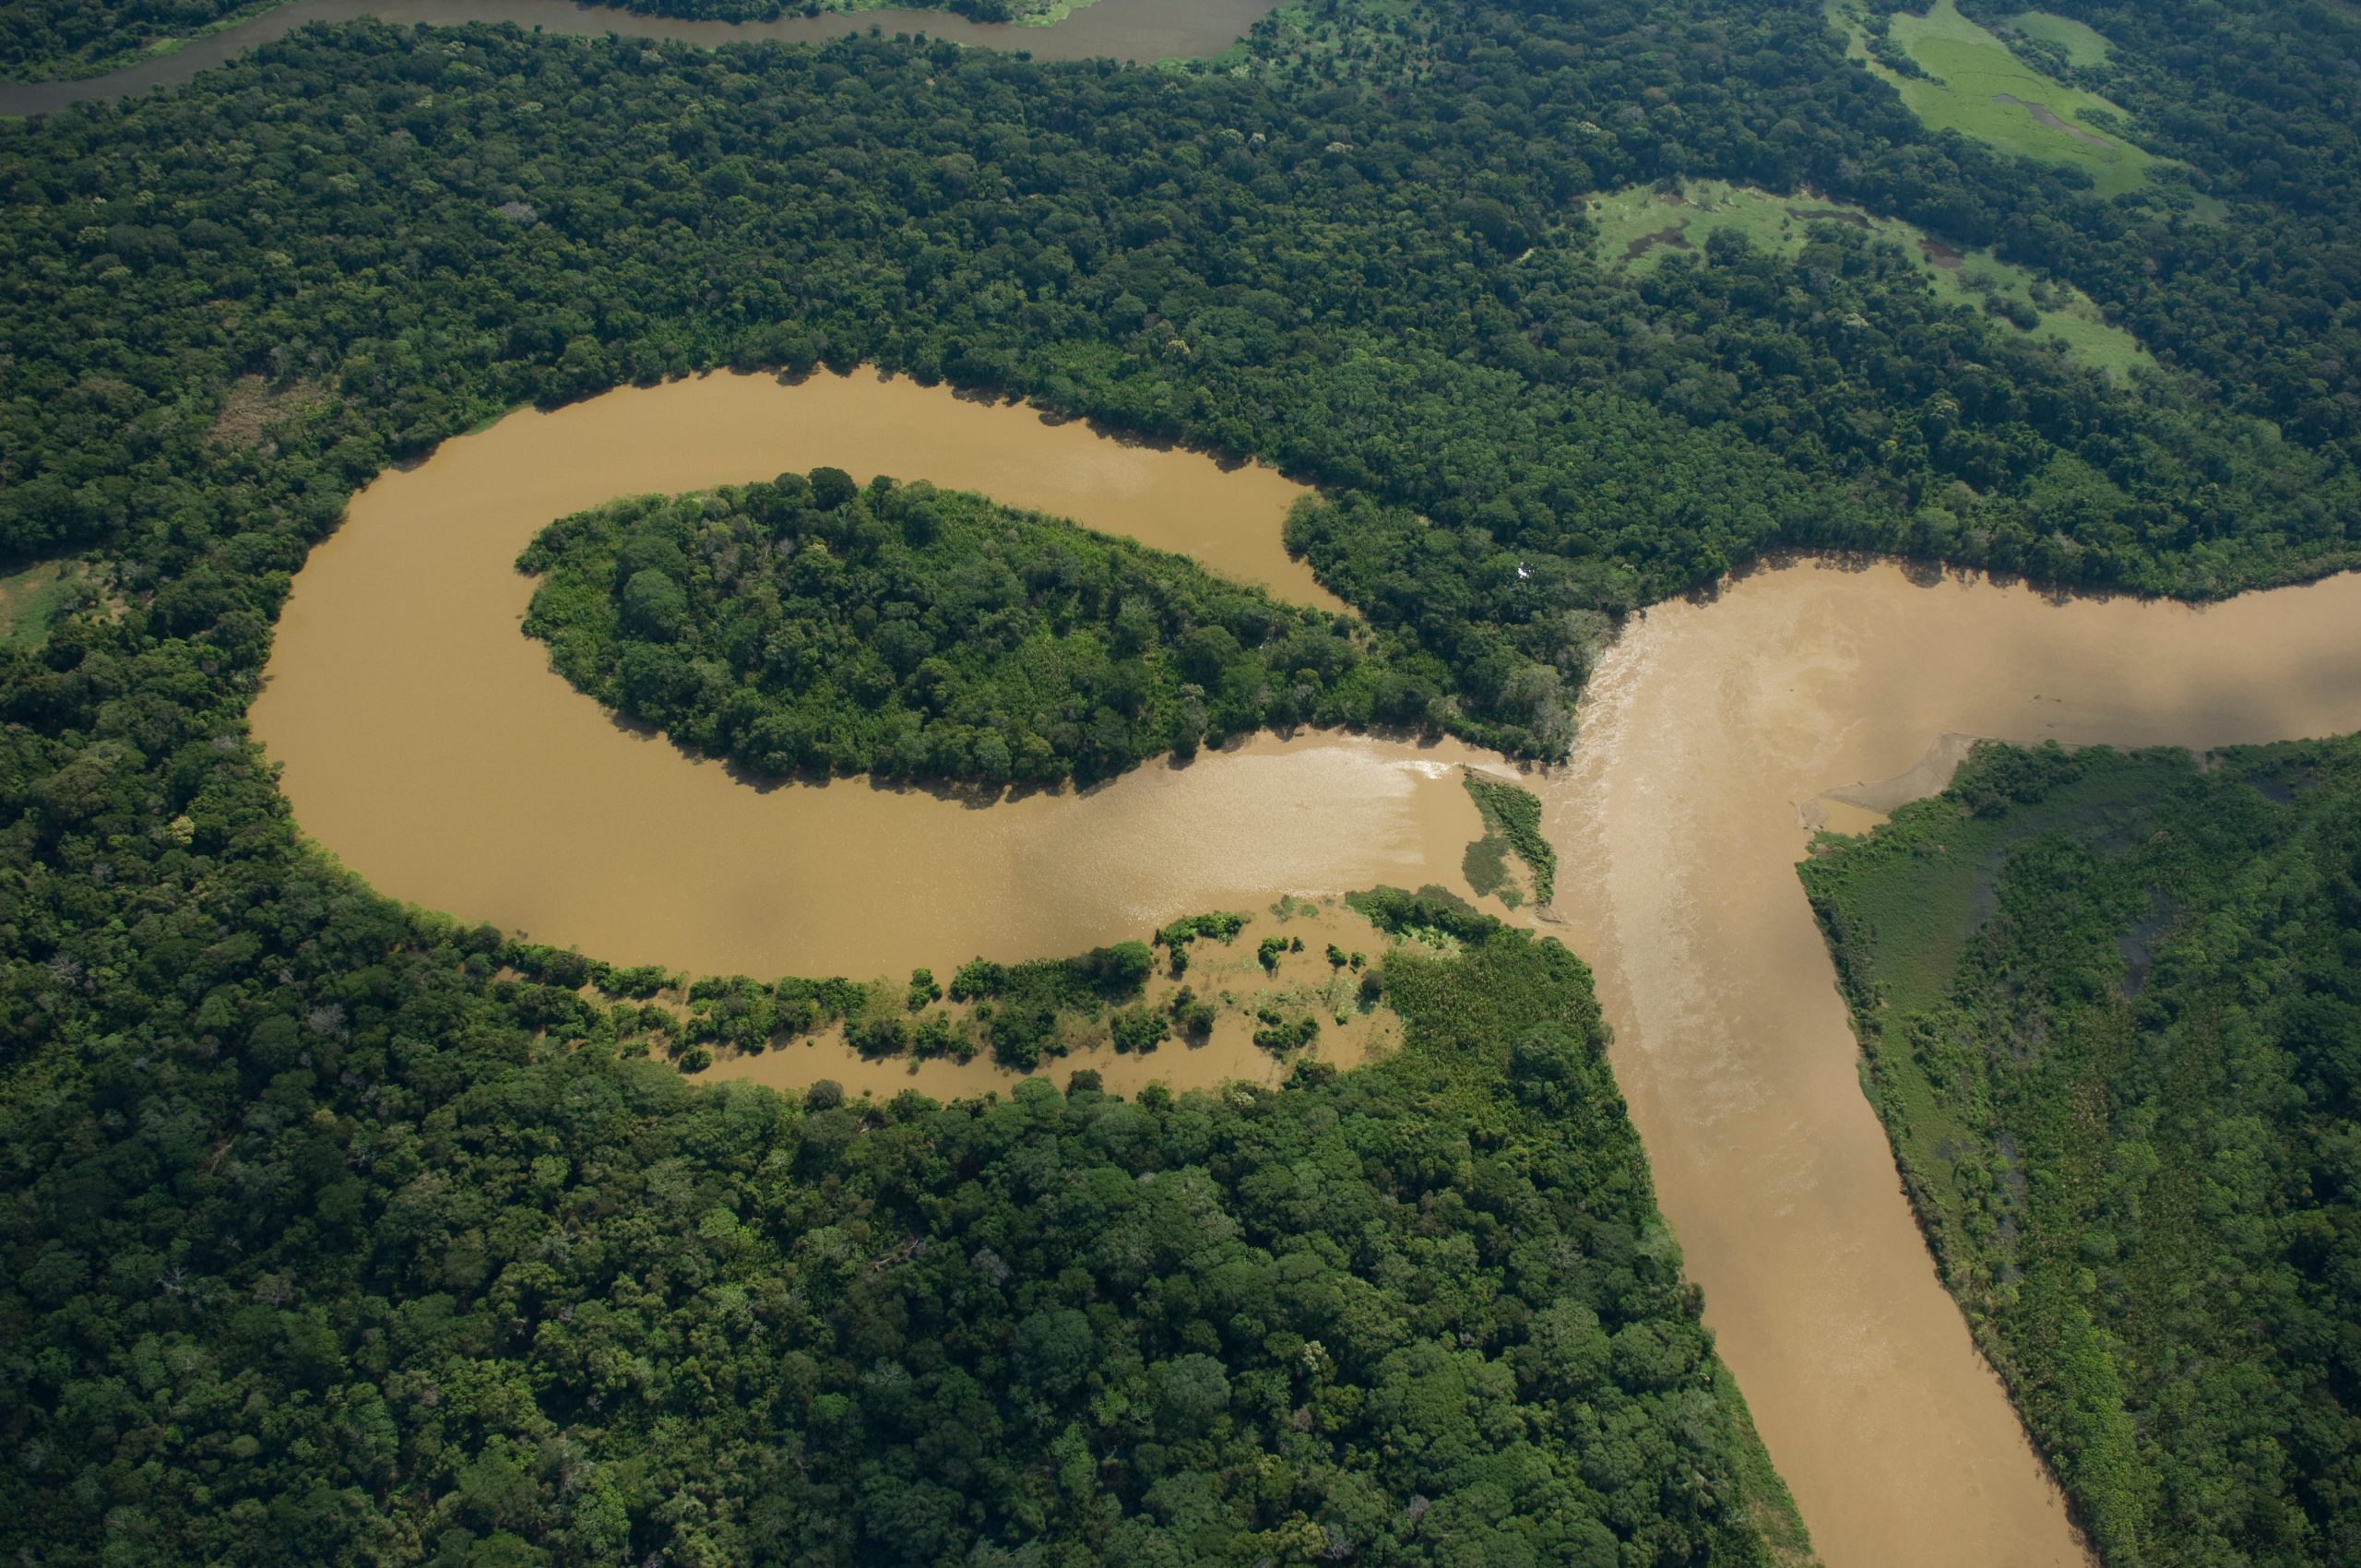 An aerial view of the meandering river in the Bolivian Amazon